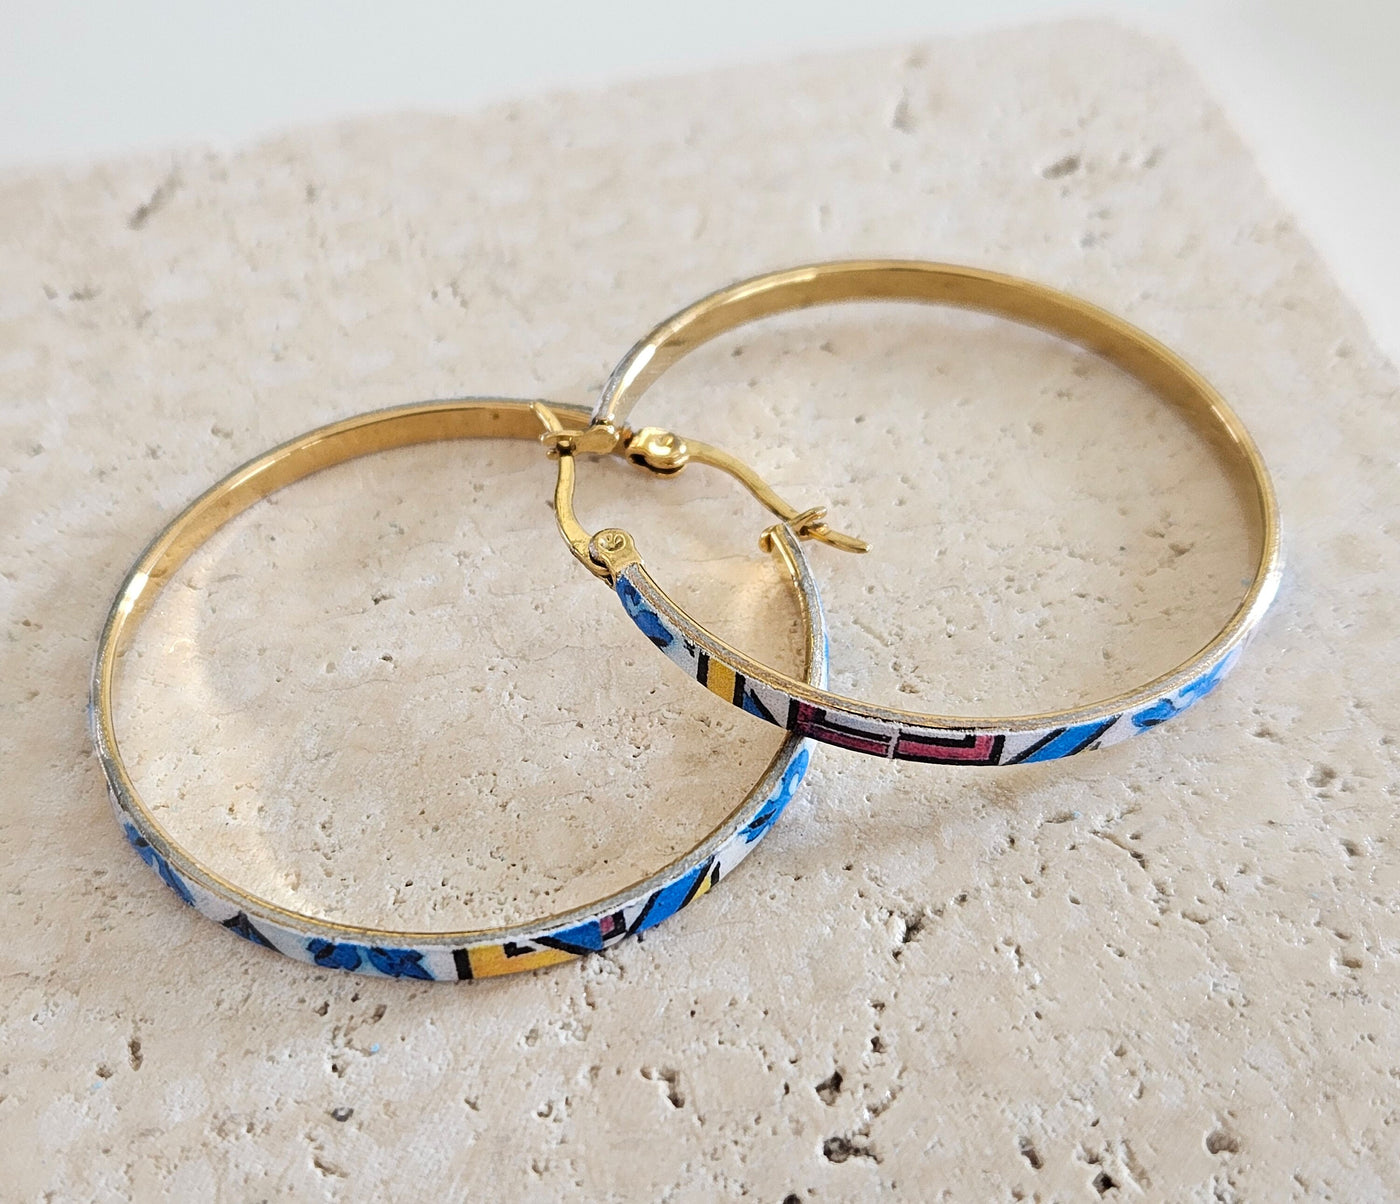 Gold Thin HOOP Tile Earrings Portugal STAINLESS STEEL Azulejo Dainty Flat Hoops Historical Tile Jewelry Portugal Gift Delft Ceramic Hoops